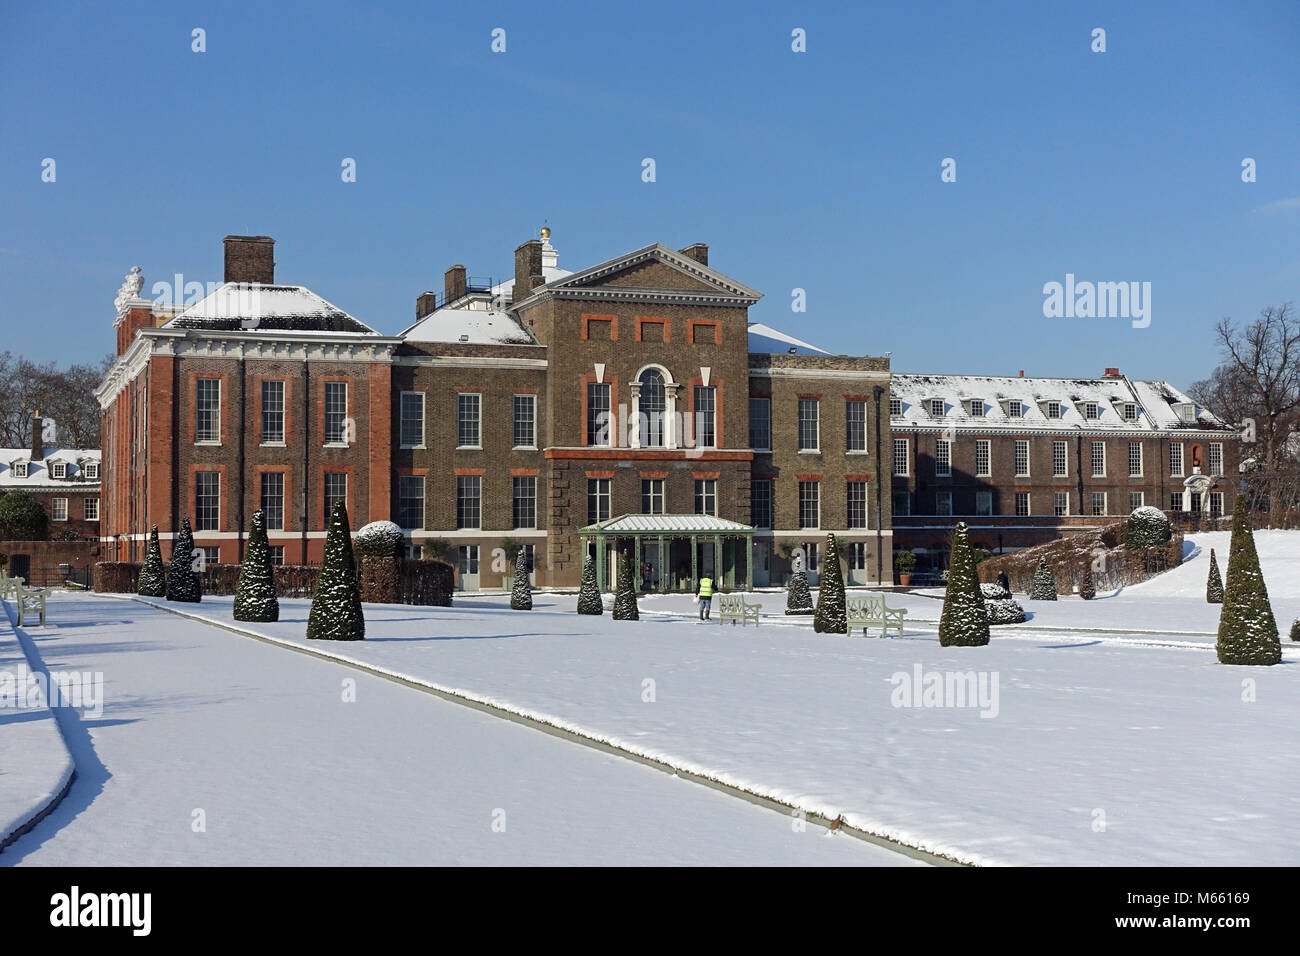 Front view of Kensington Palace in London on a cold winter day with snow from the Beast from the East cold spell in February 2018 Stock Photo